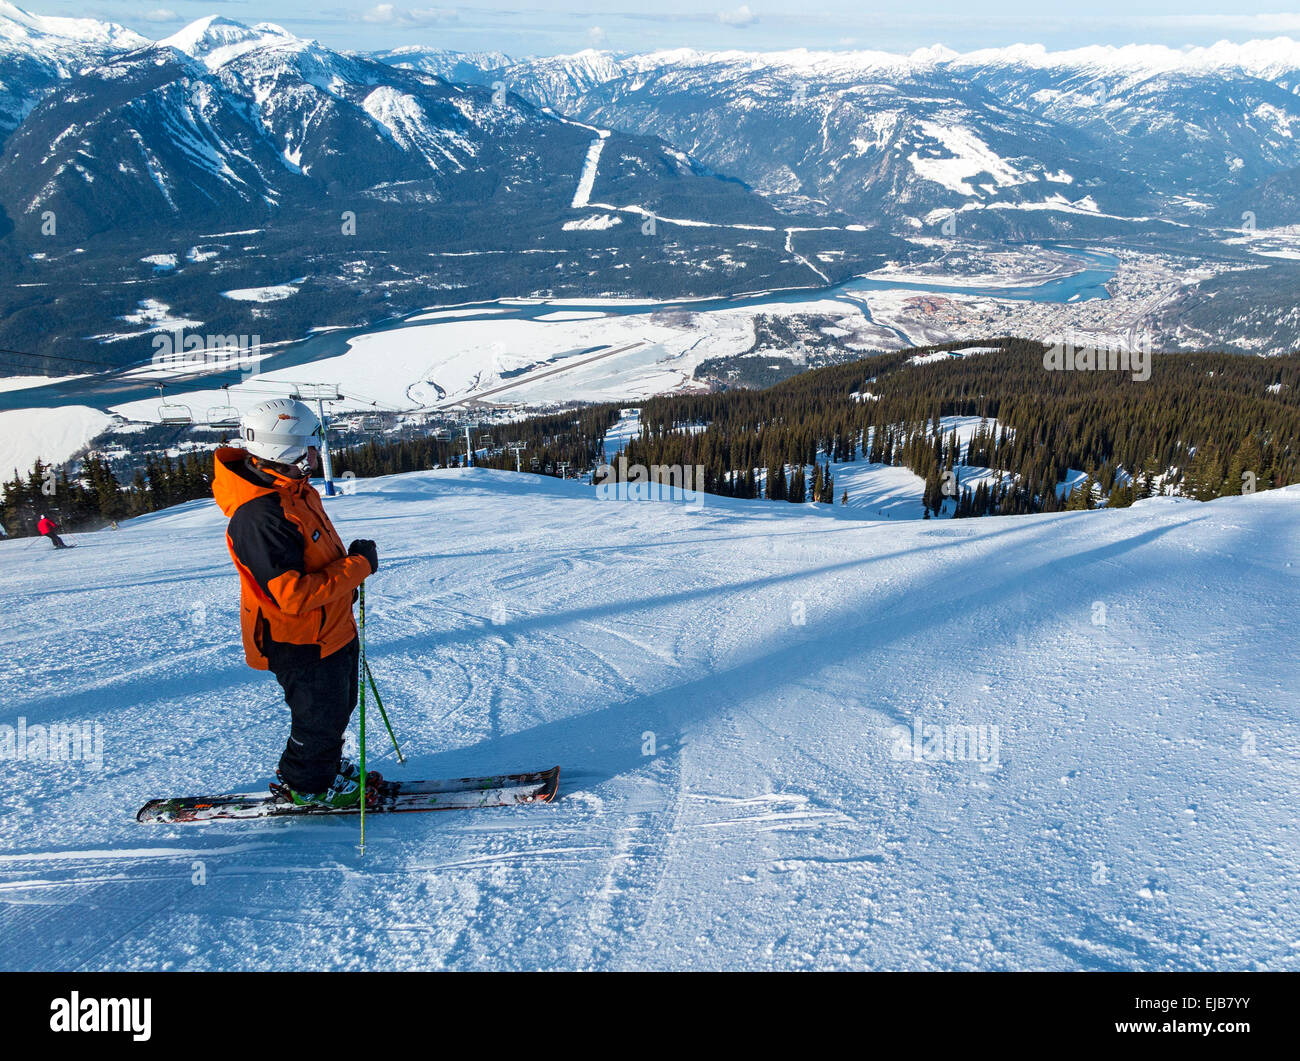 View of Revelstoke town, the valley, Columbia River and Monashees Mountains from the top of Revelstoke ski slope. Stock Photo